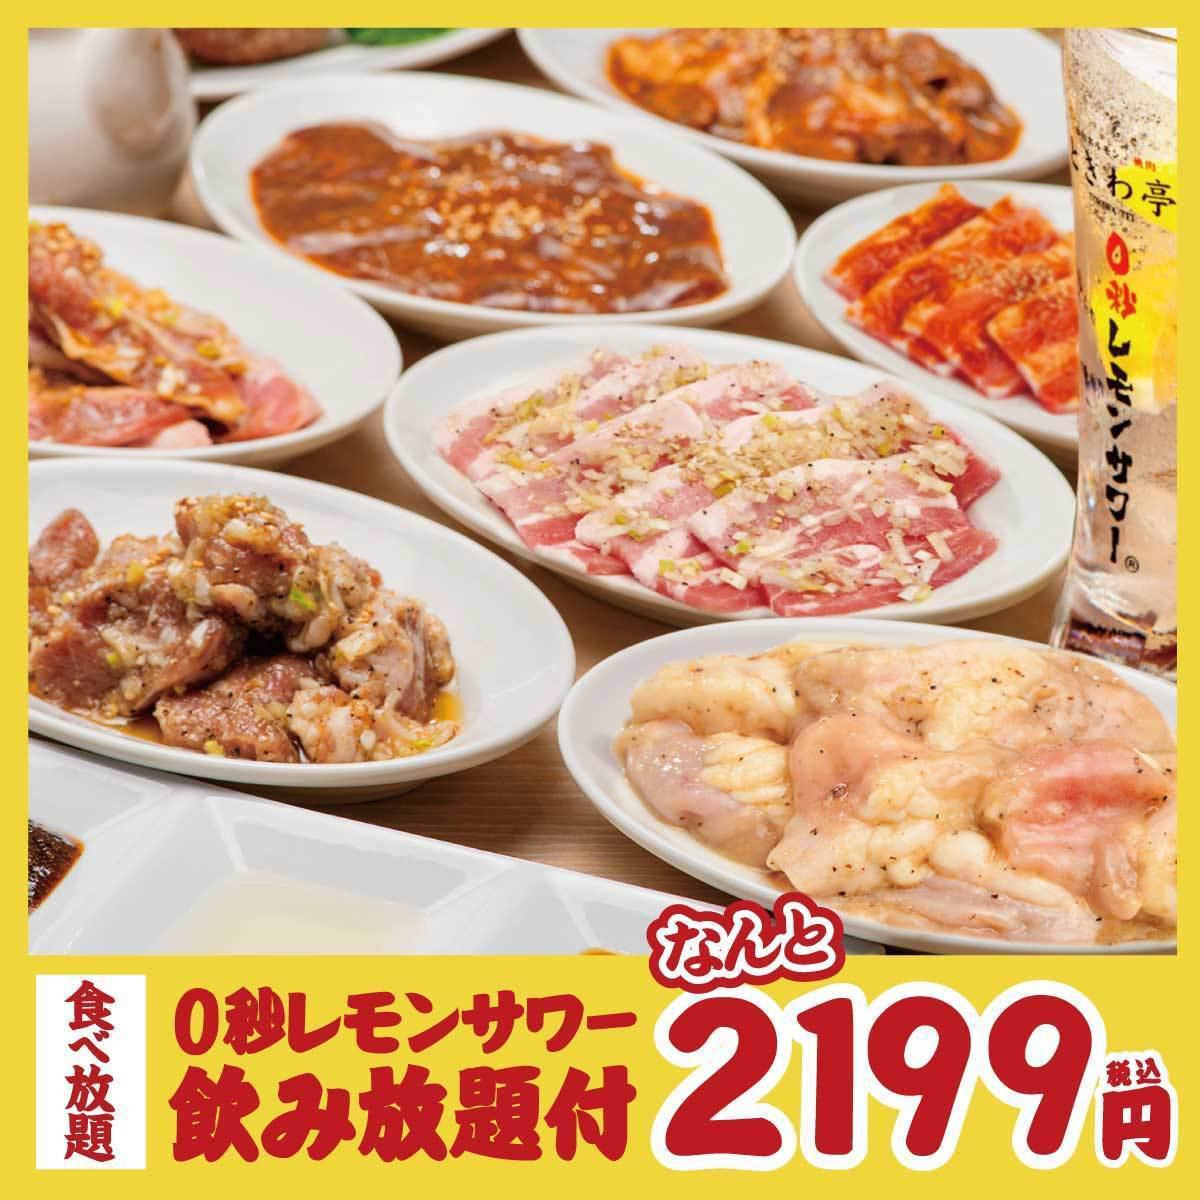 All-you-can-eat and drink is available starting from 2,199 yen!! Enjoy our proud meat★